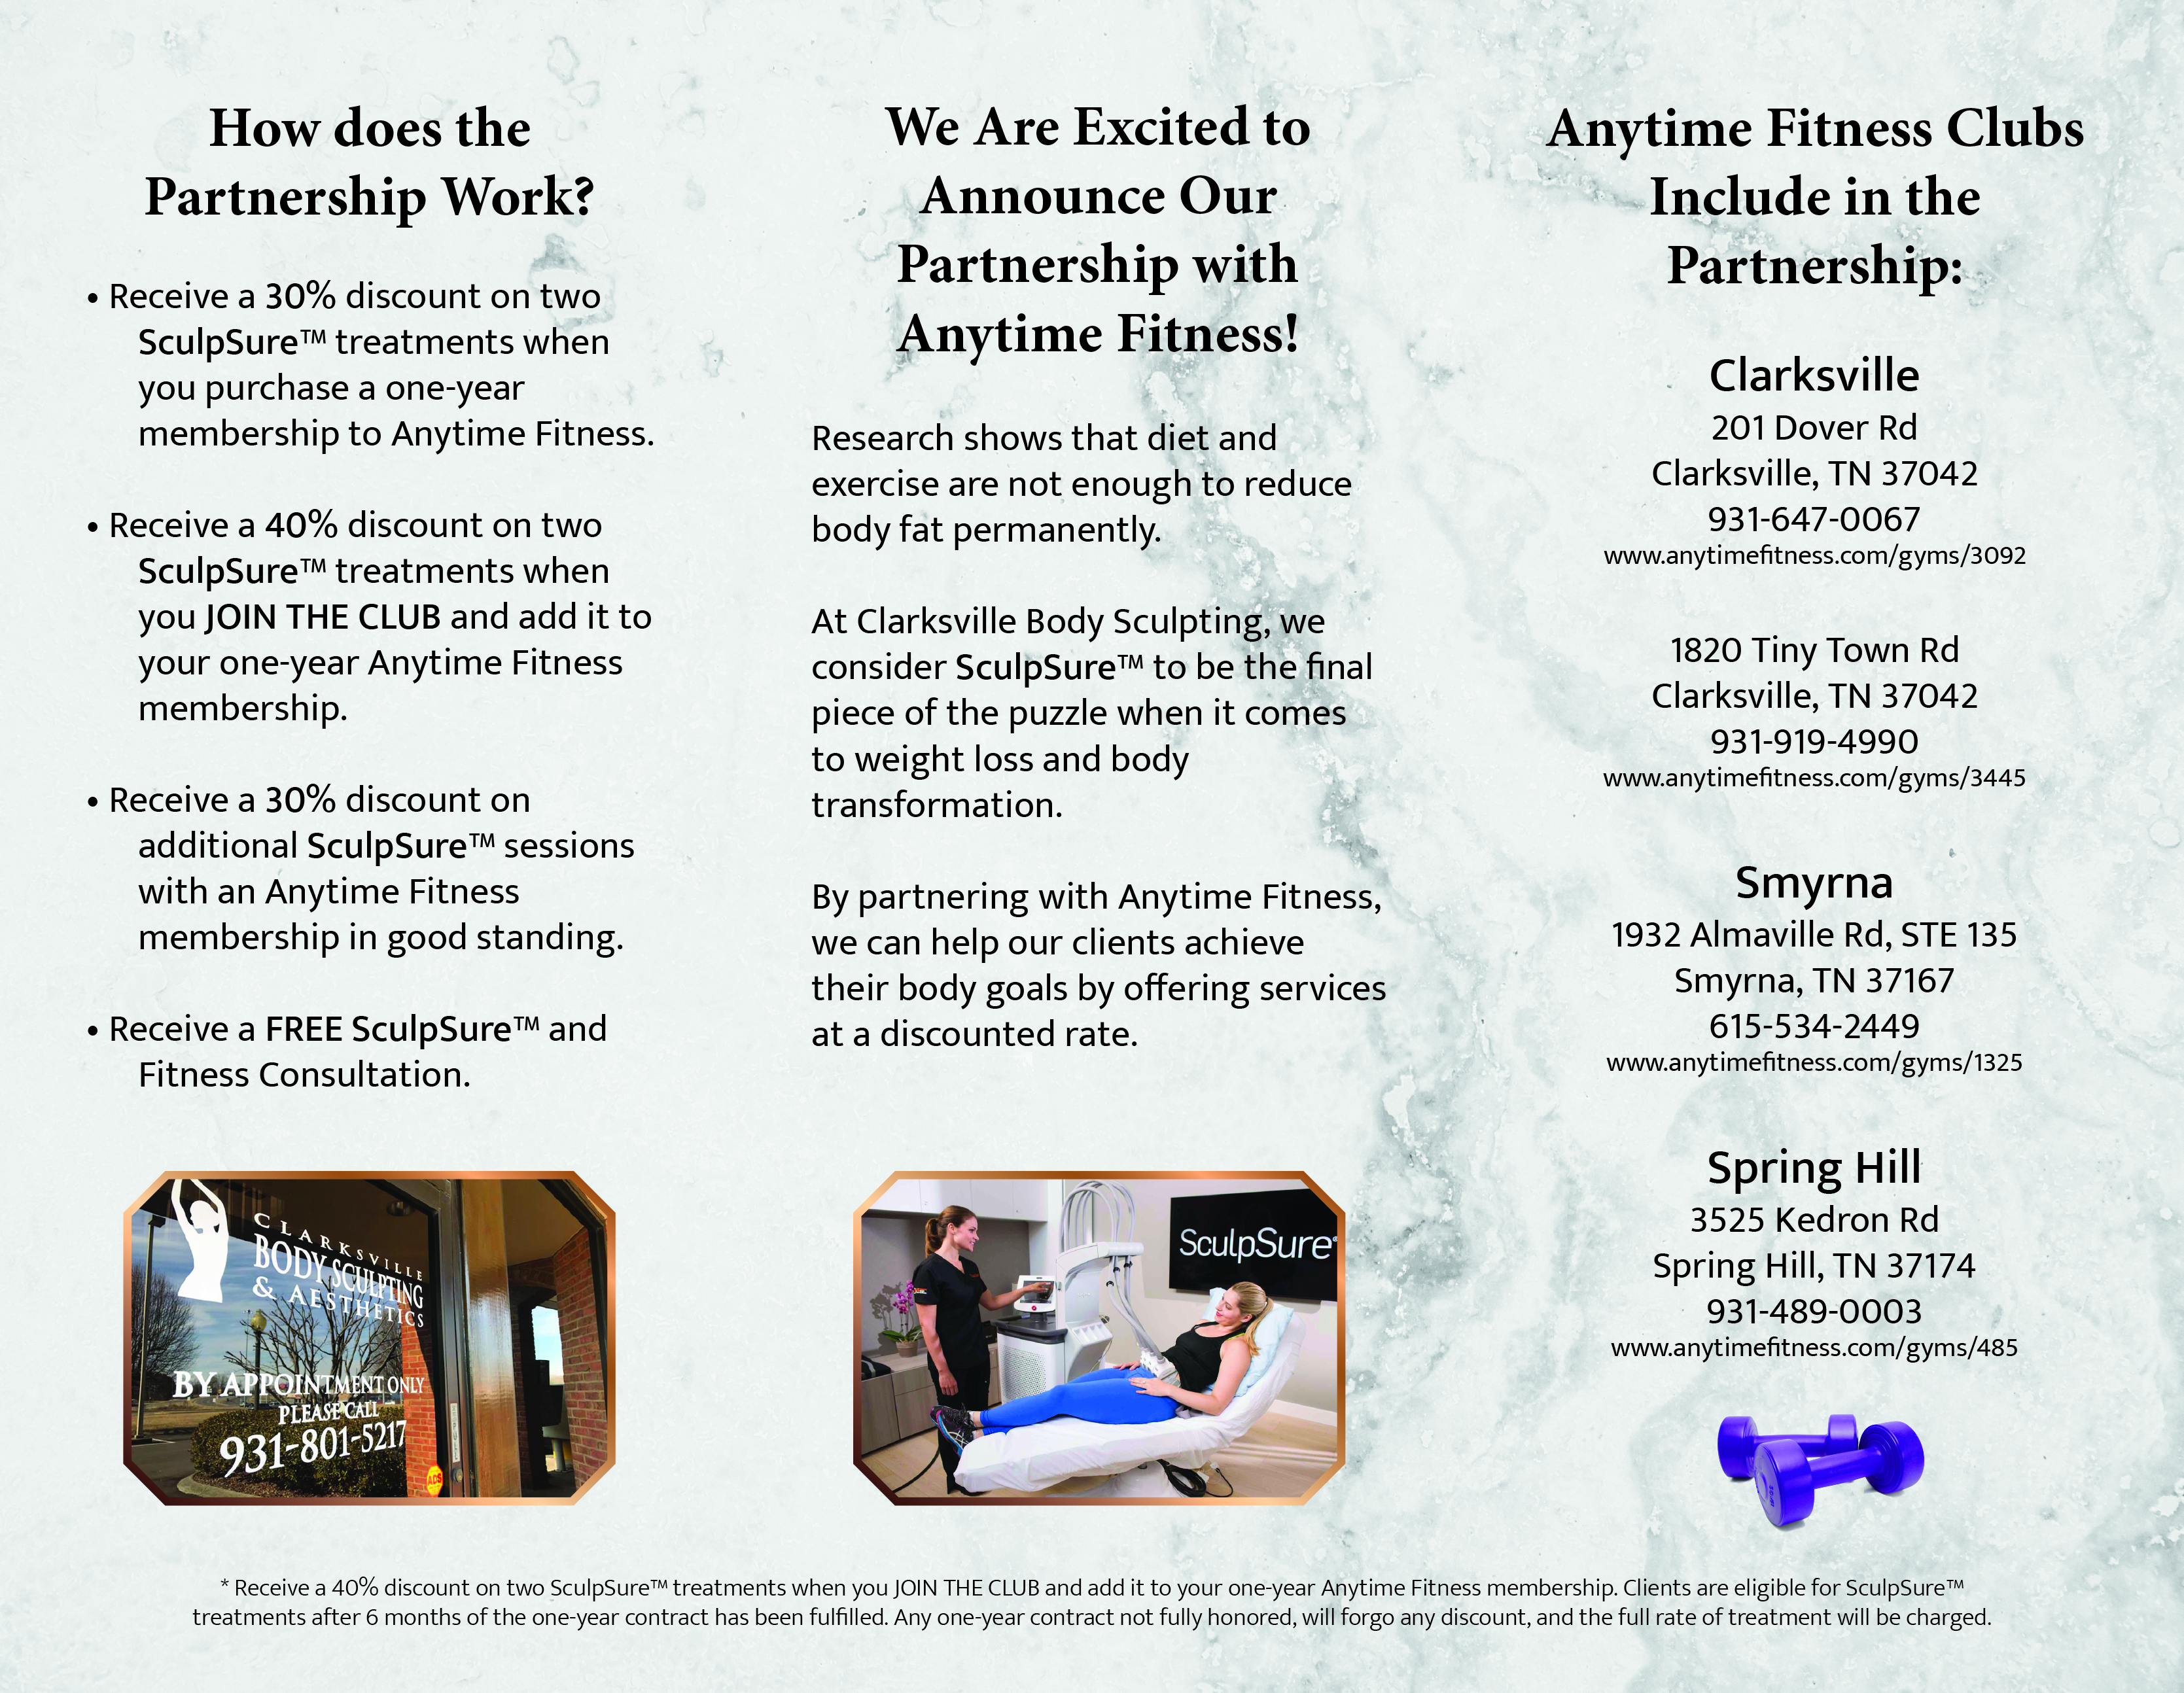 Clarksville Body Sculpting & Aesthetics partnership with Anytime Fitness in Clarksville